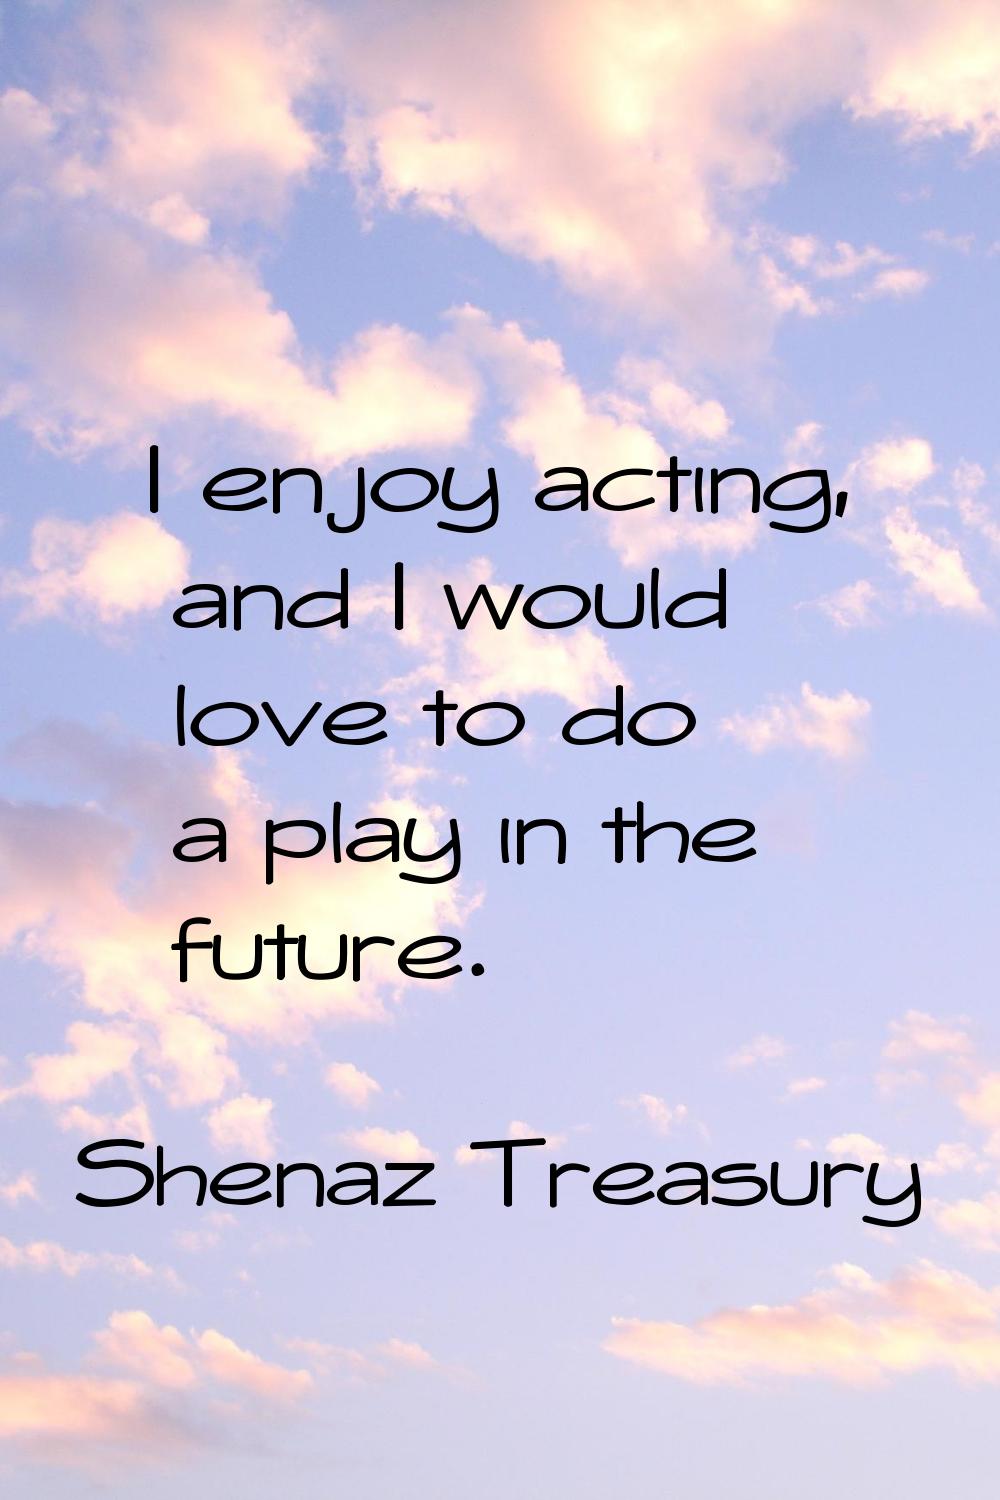 I enjoy acting, and I would love to do a play in the future.